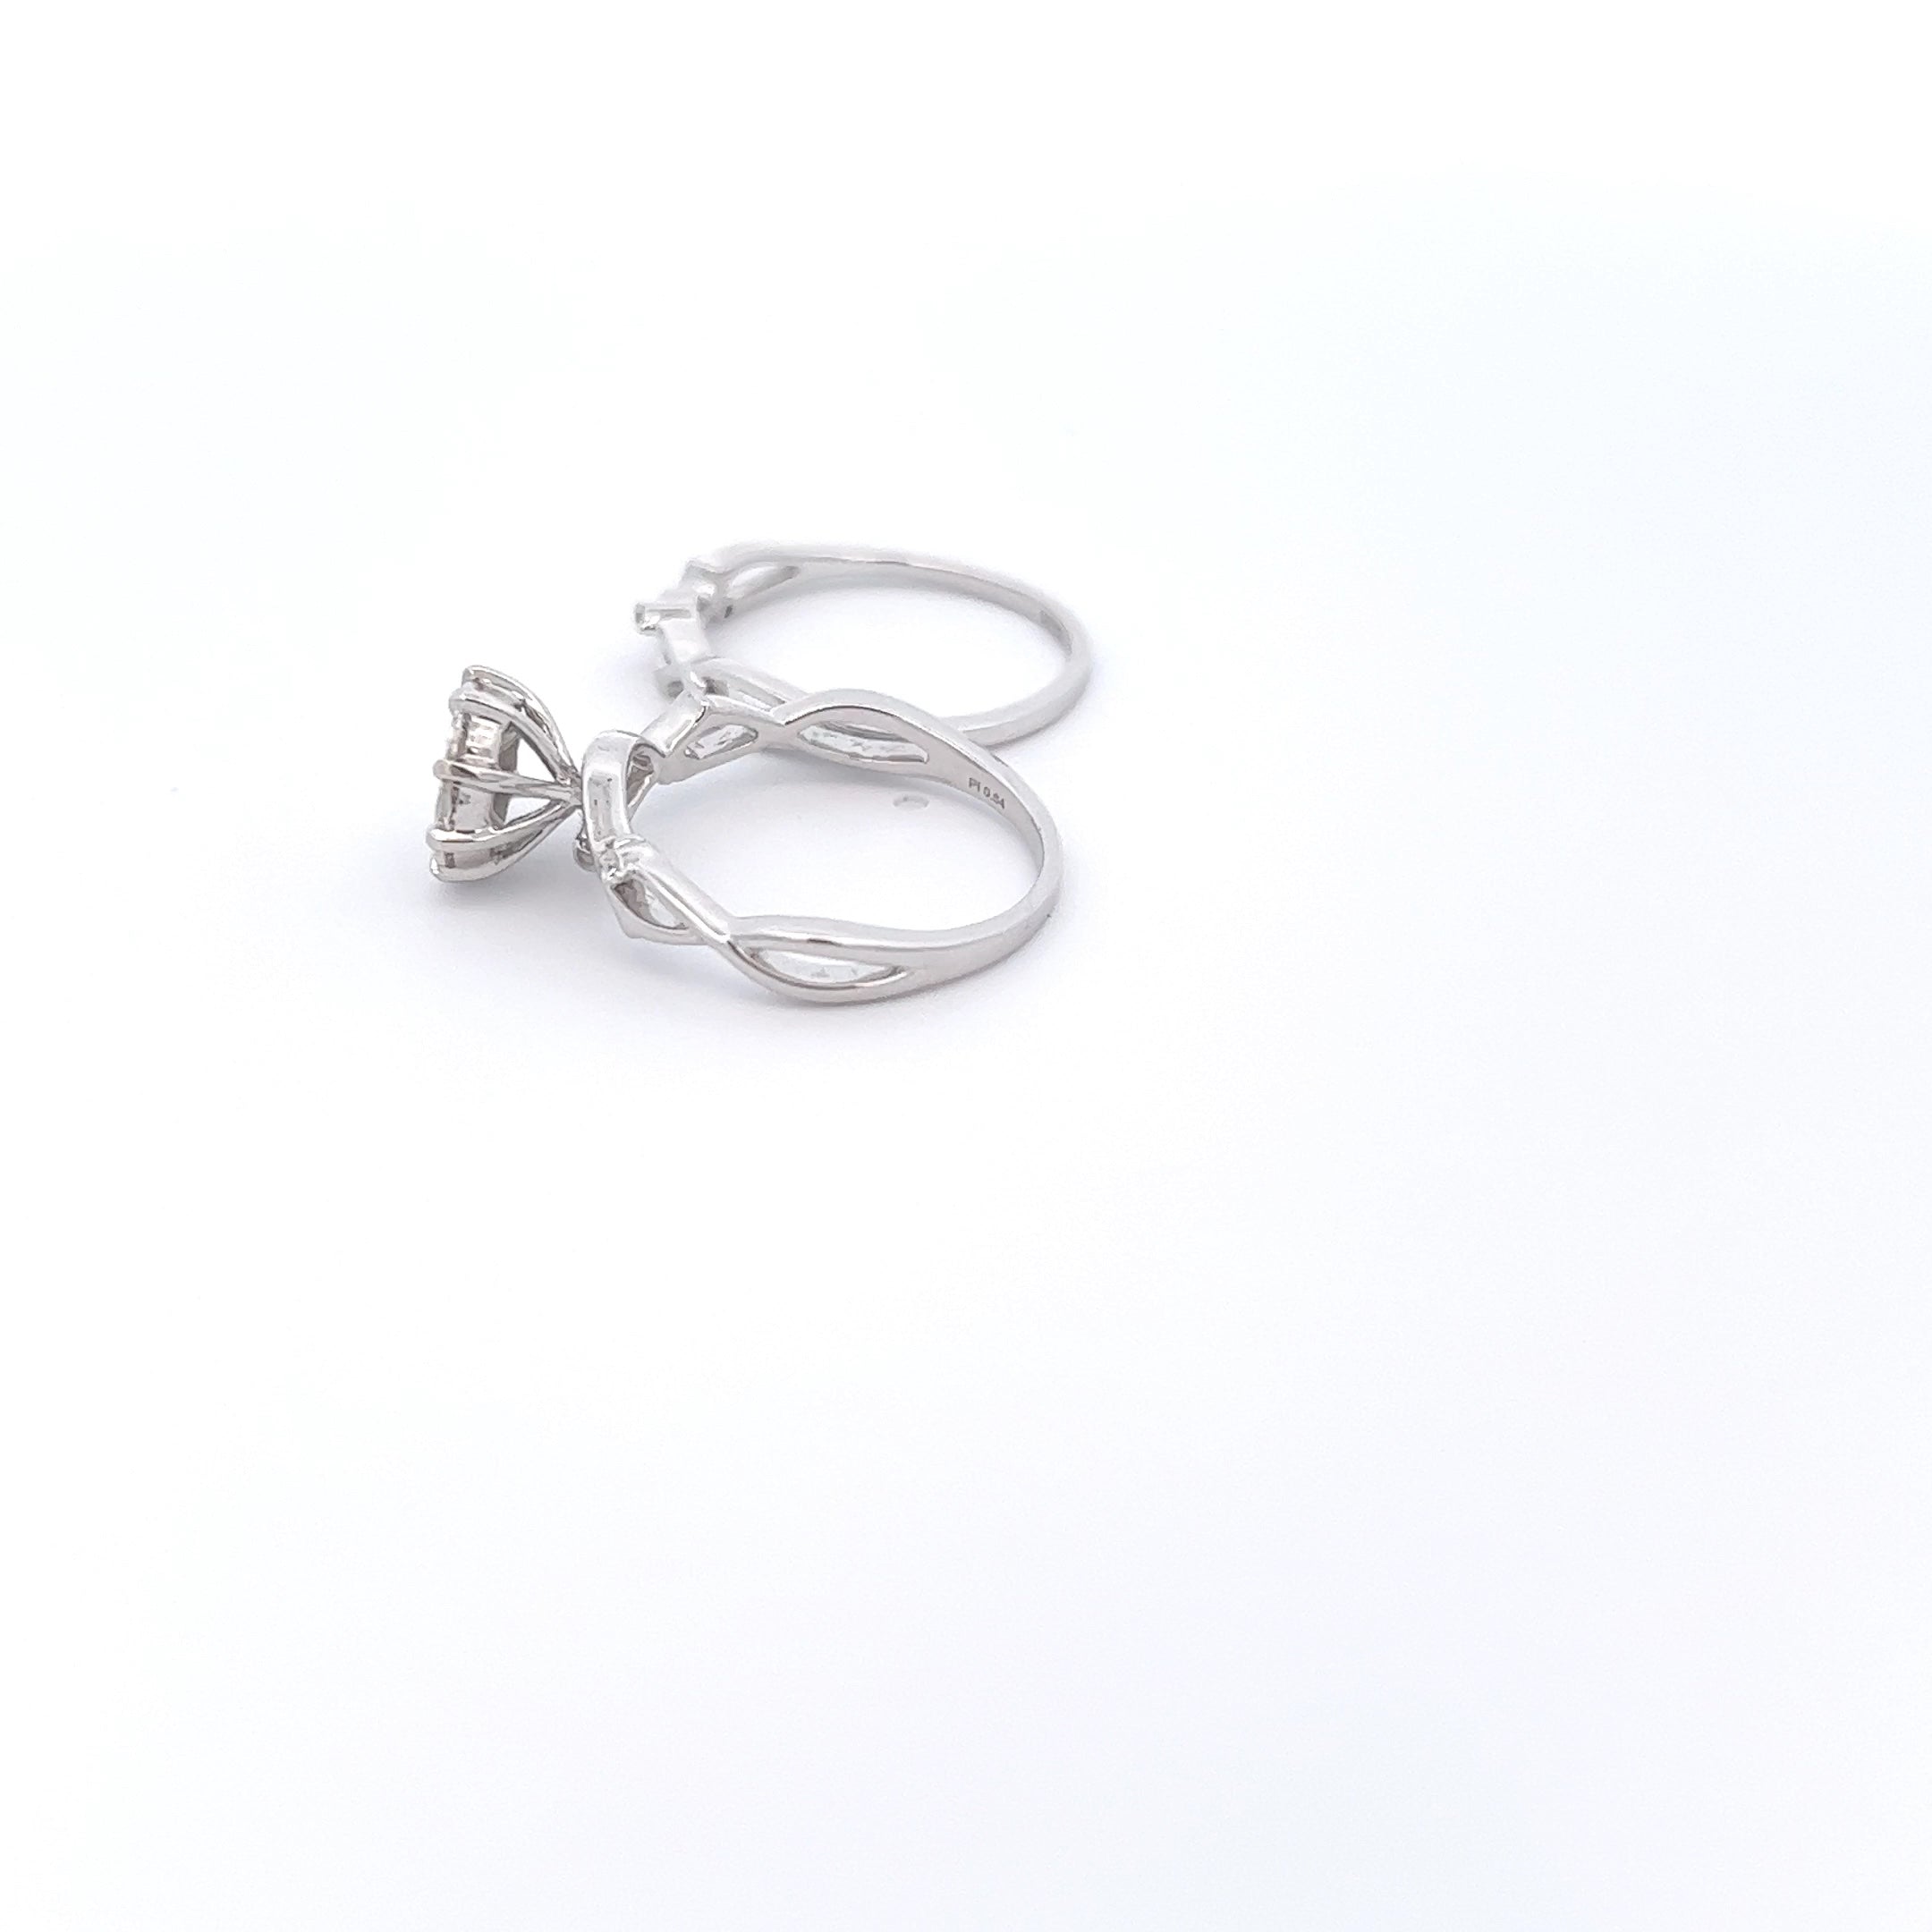 Two Looks, One Ring: 14k White Gold Convertible Diamond Ring